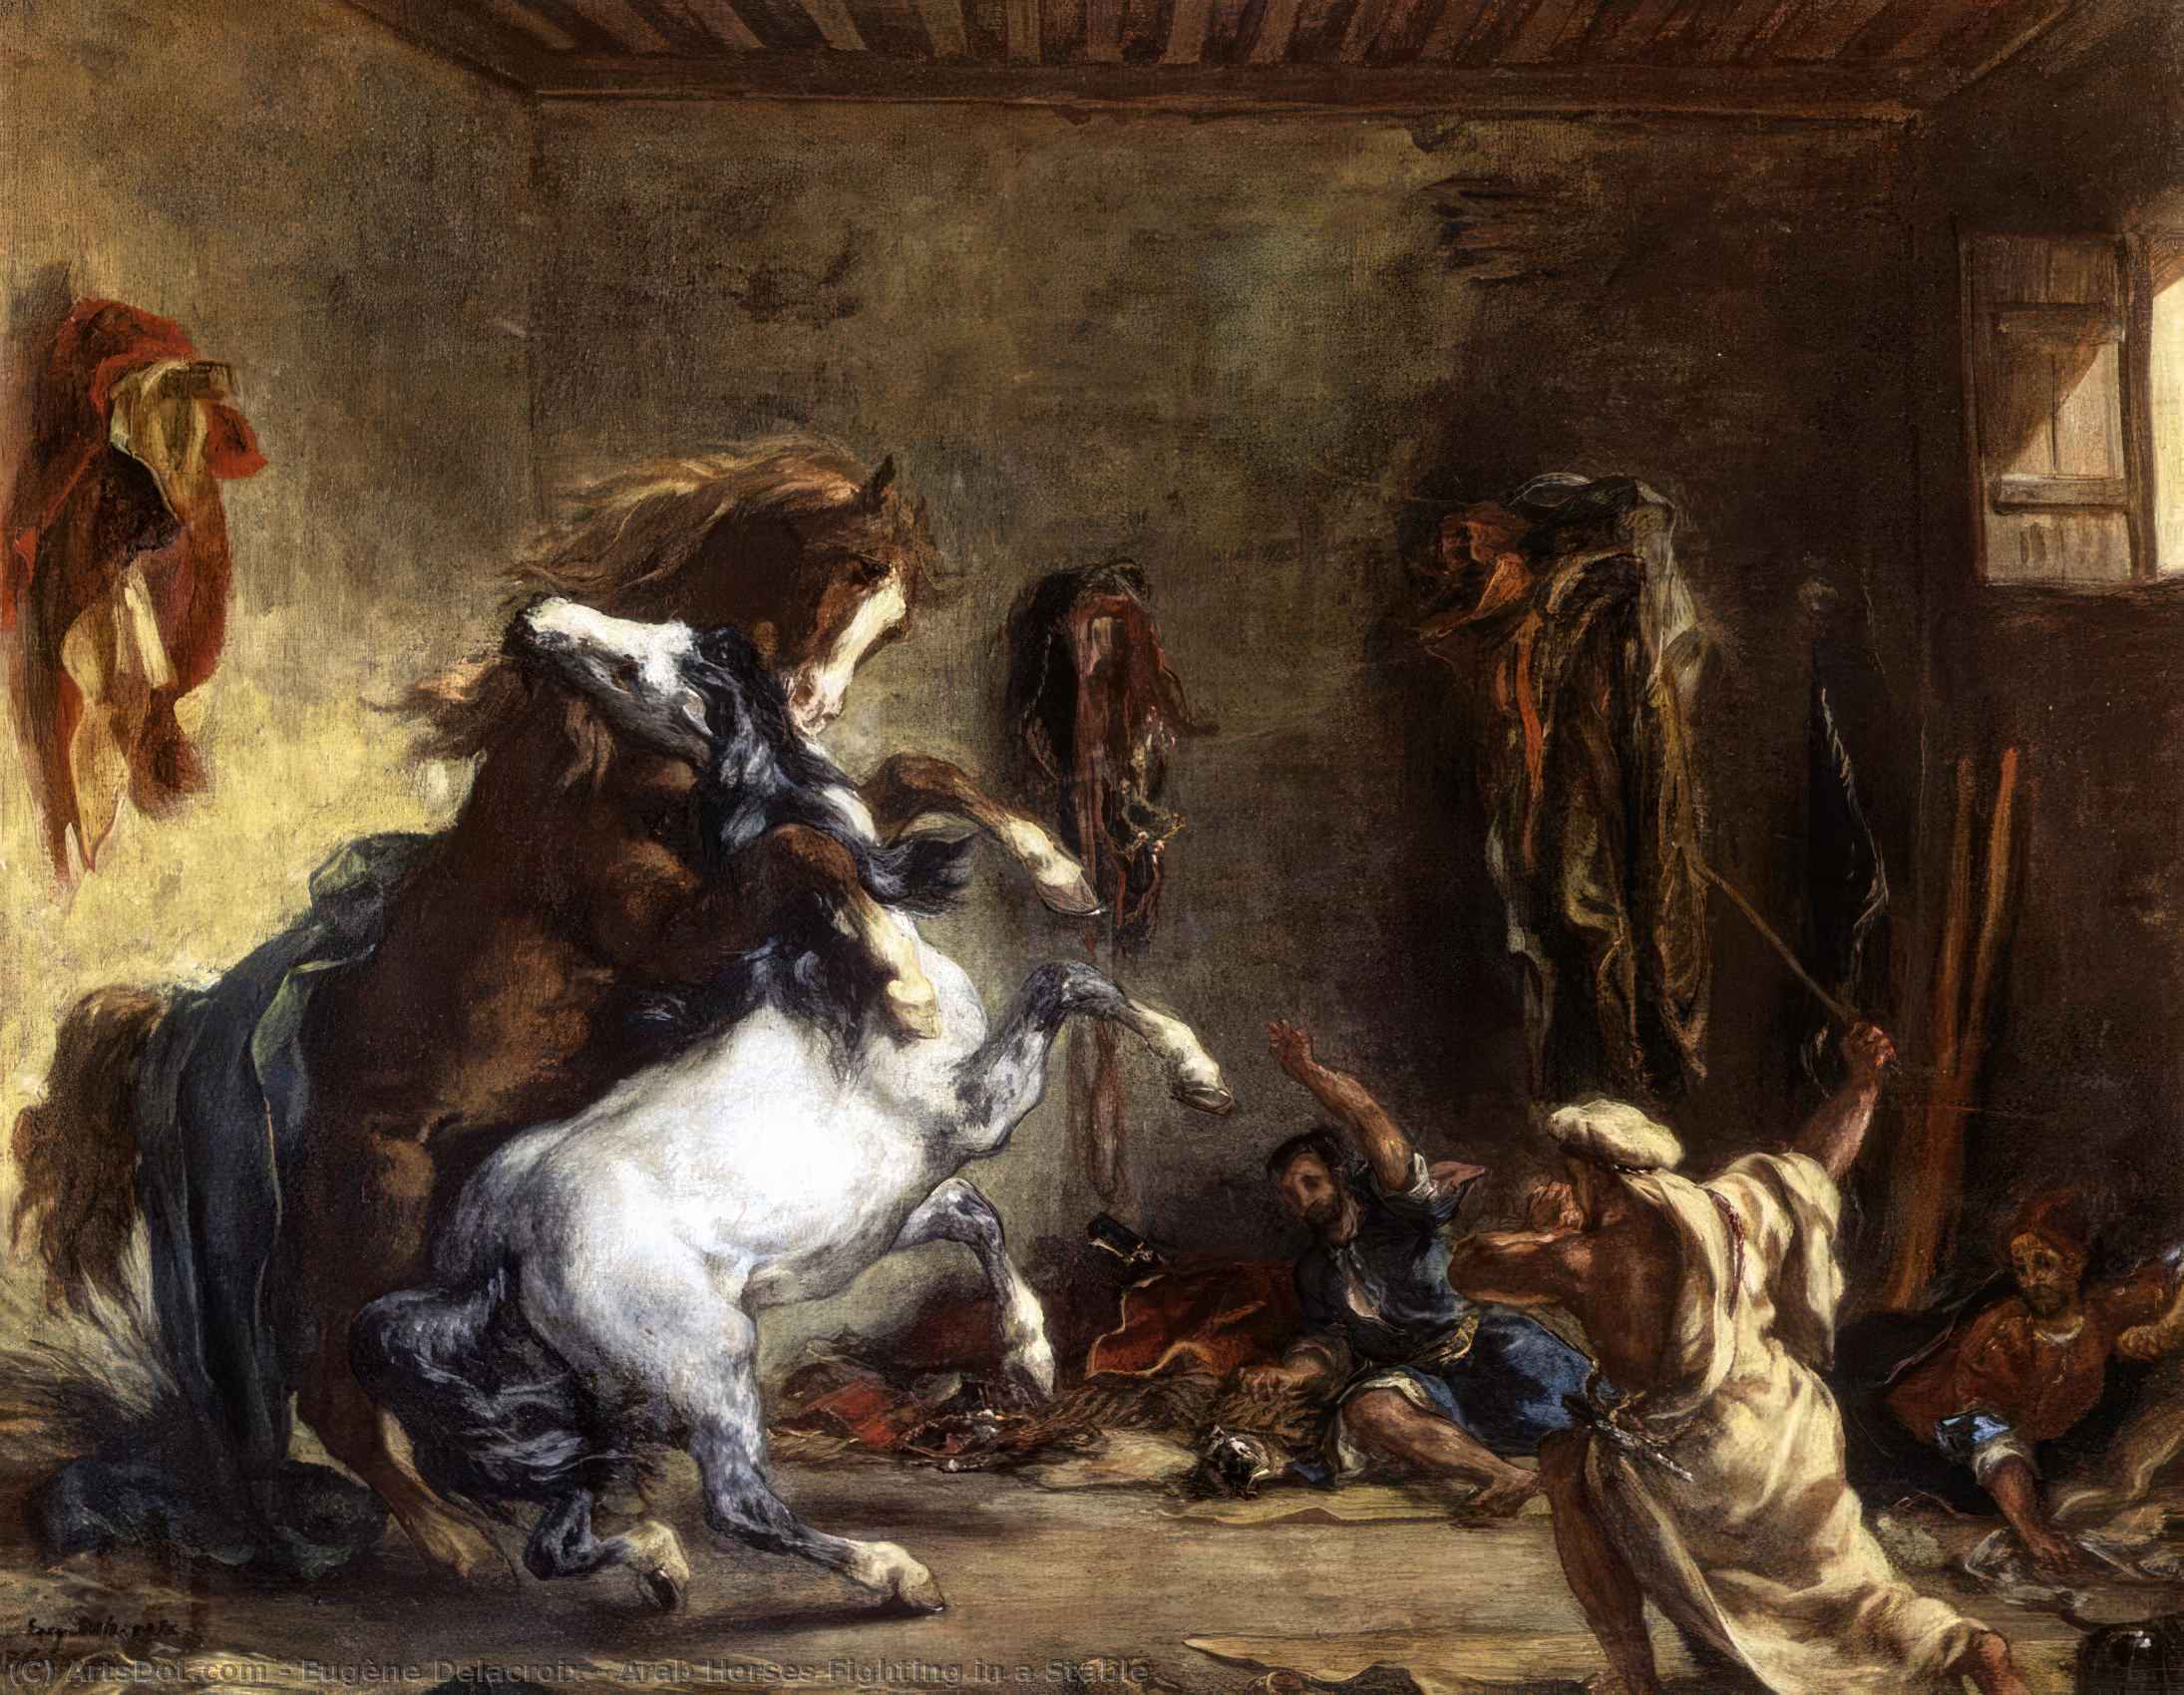  Paintings Reproductions Arab Horses Fighting in a Stable, 1860 by Eugène Delacroix (1798-1863, France) | ArtsDot.com